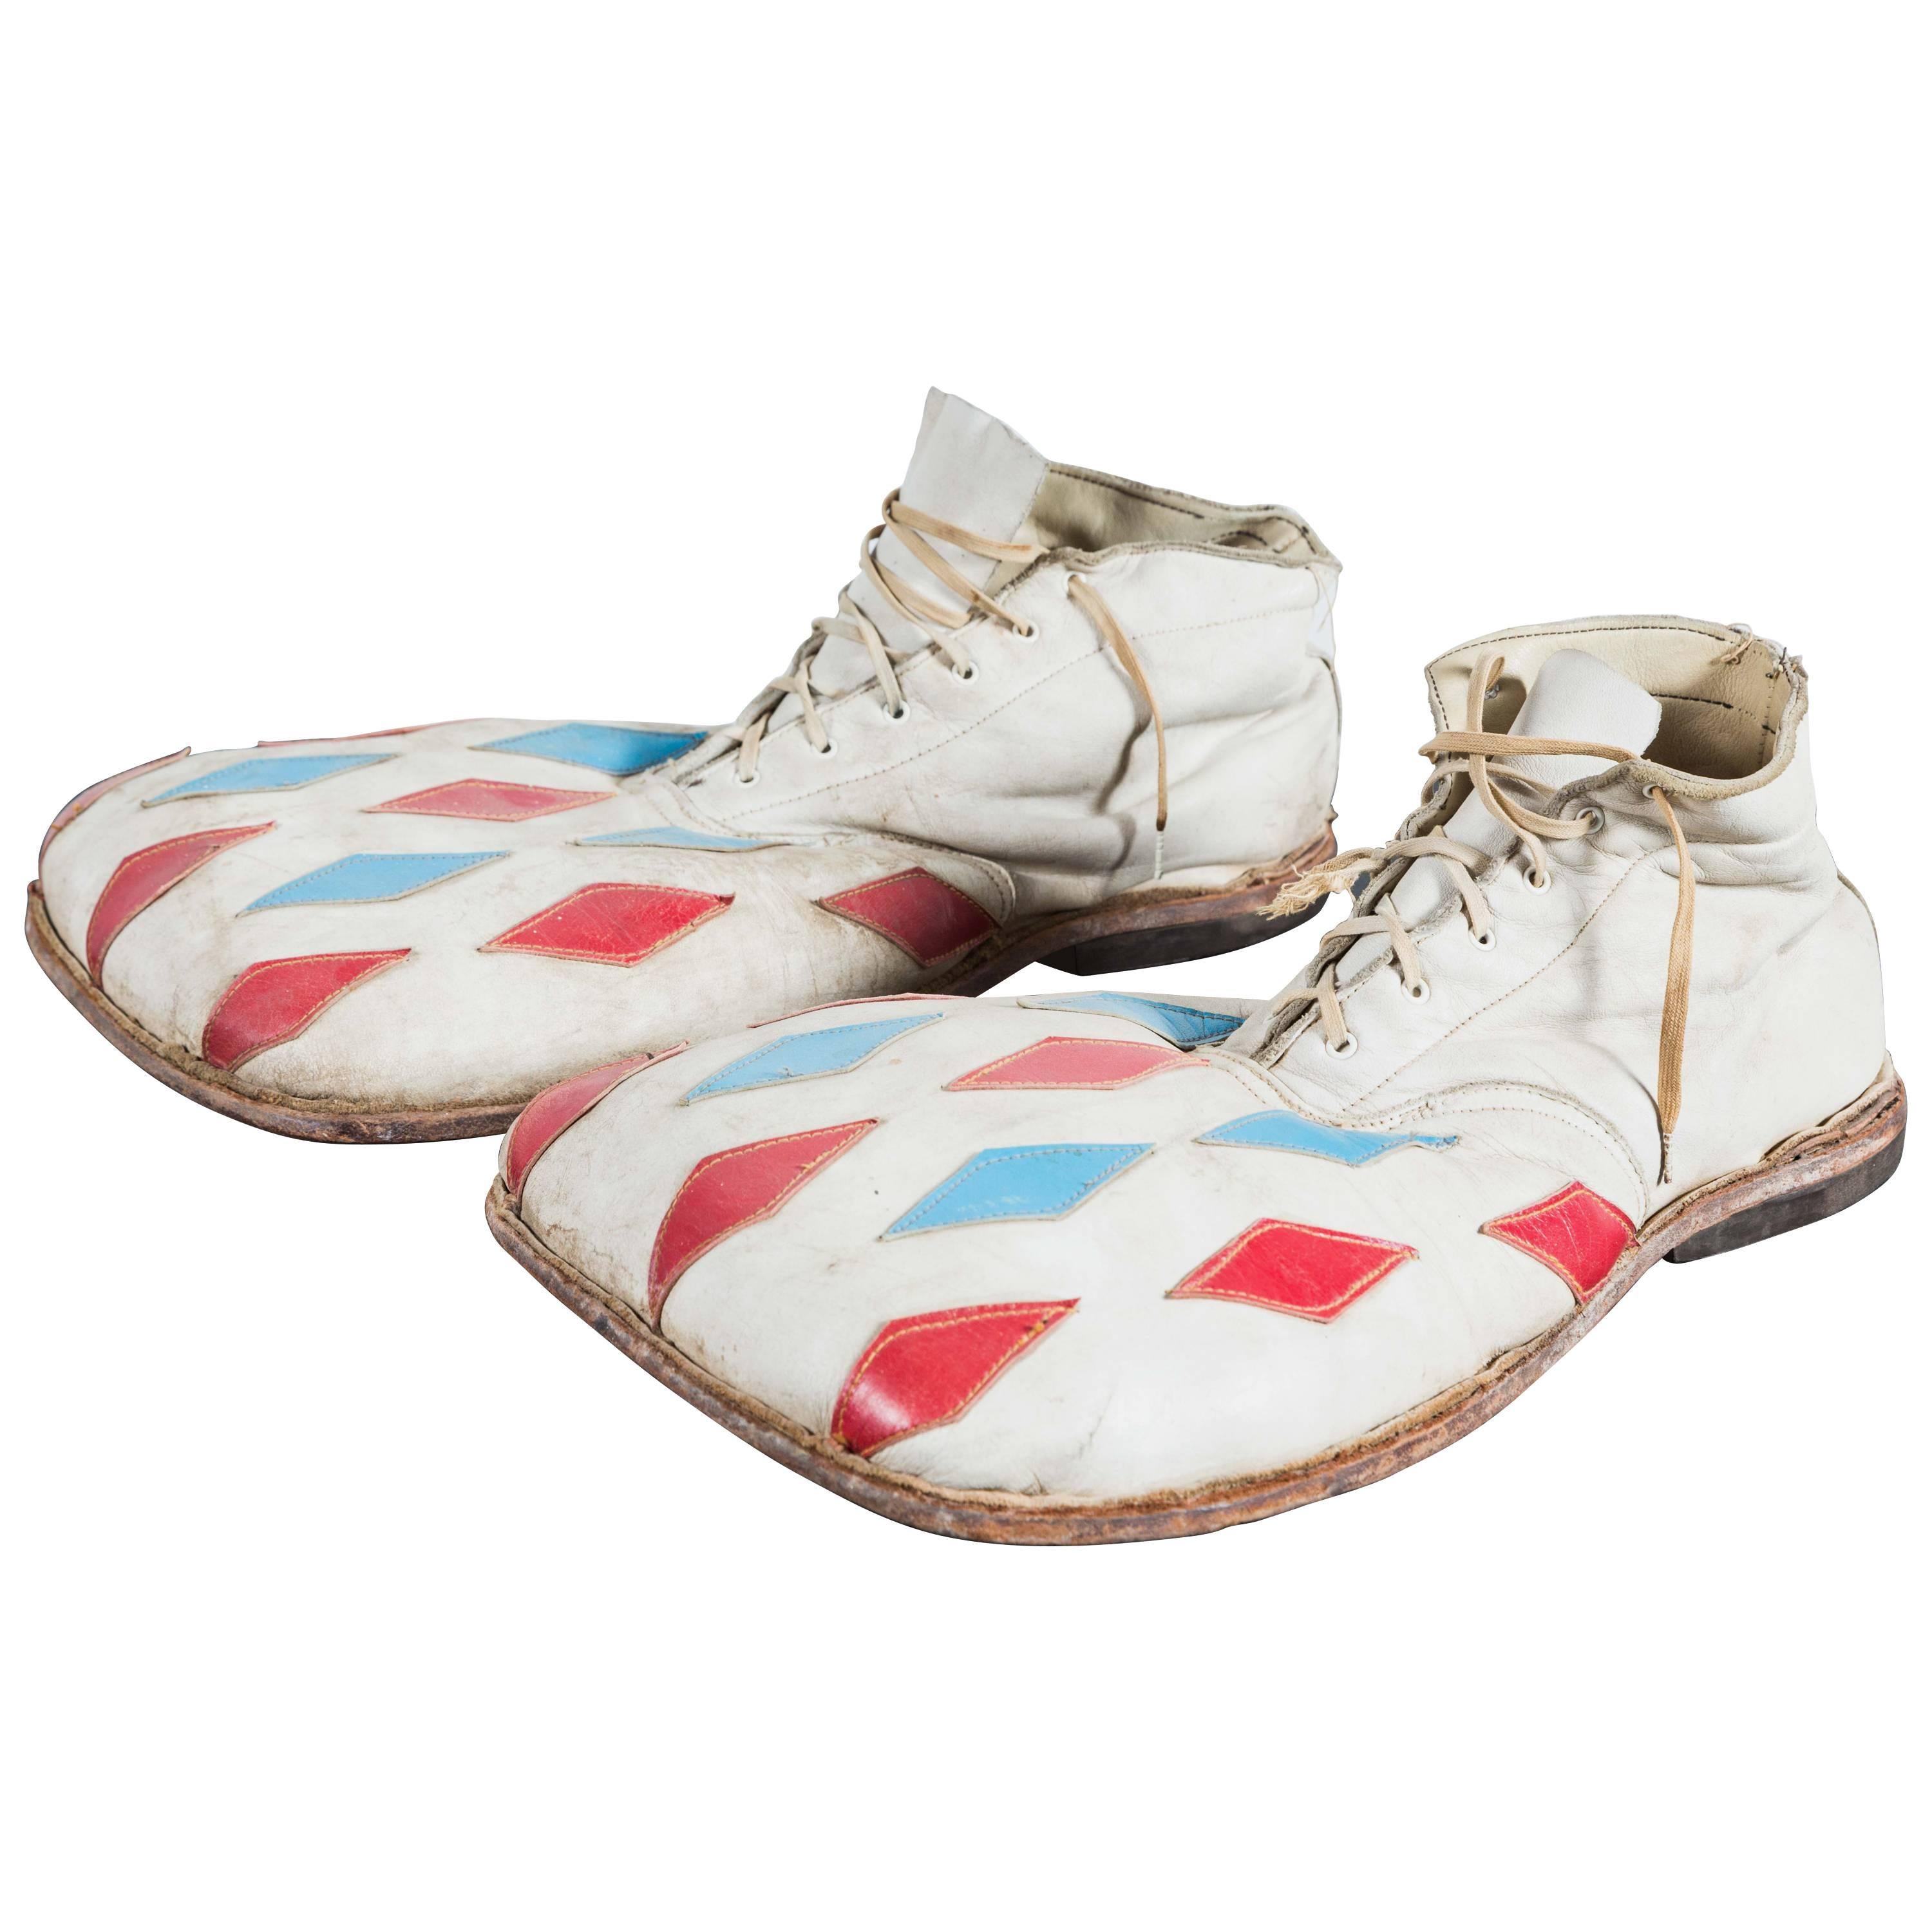 Vintage Circus or Carnival Clown Diamond Red White and Blue Clown Shoes